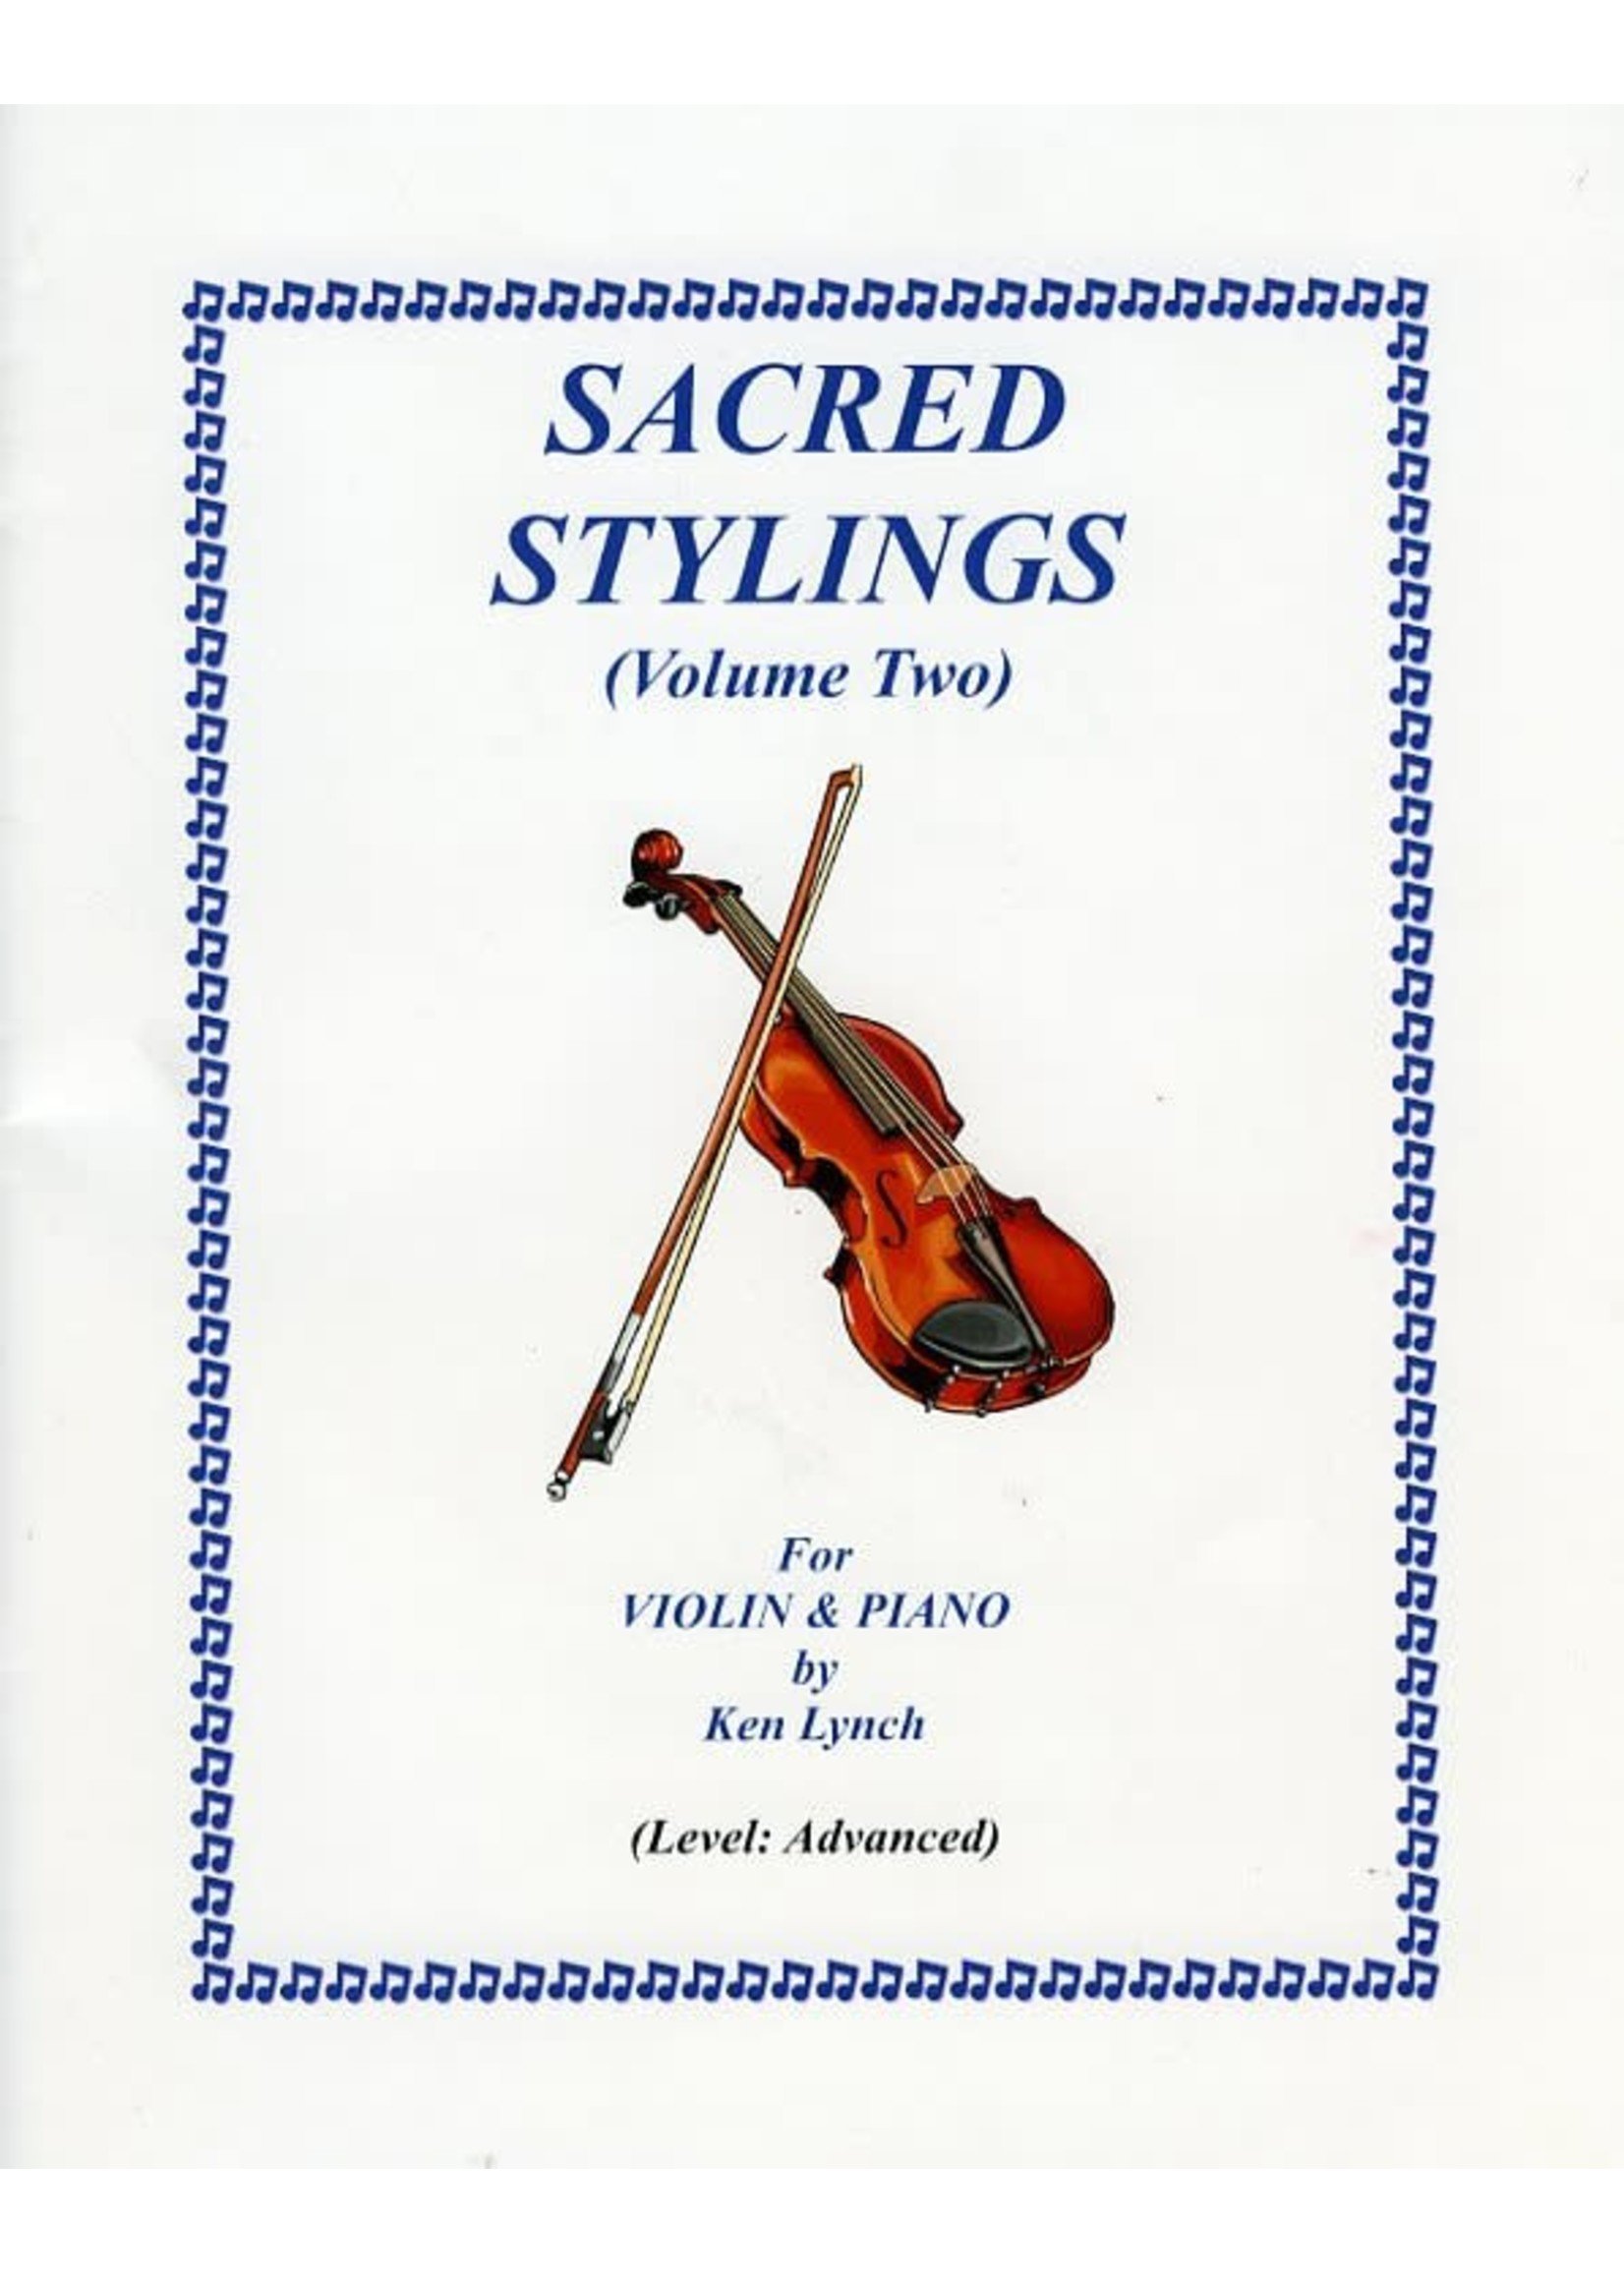 Sacred Stylings for Violin and Piano Volume 2 (Ken Lynch)